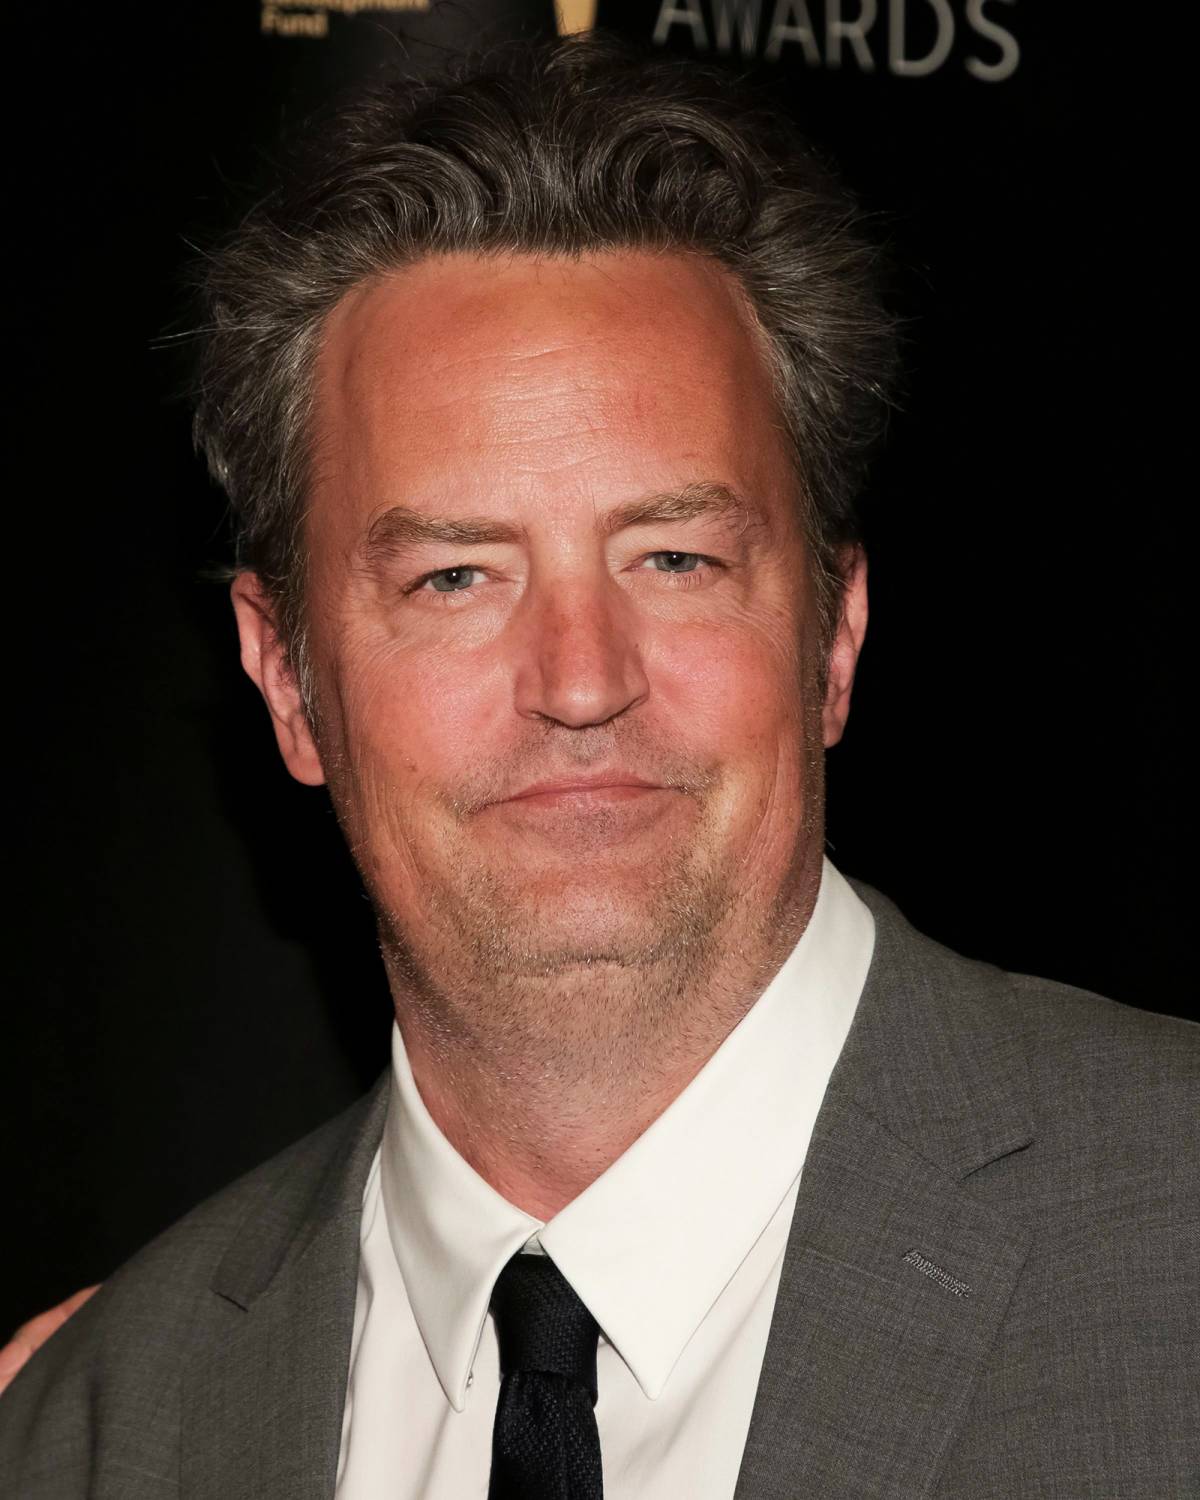 Matthew Perry's Ups and Downs Through the Years: A Timeline